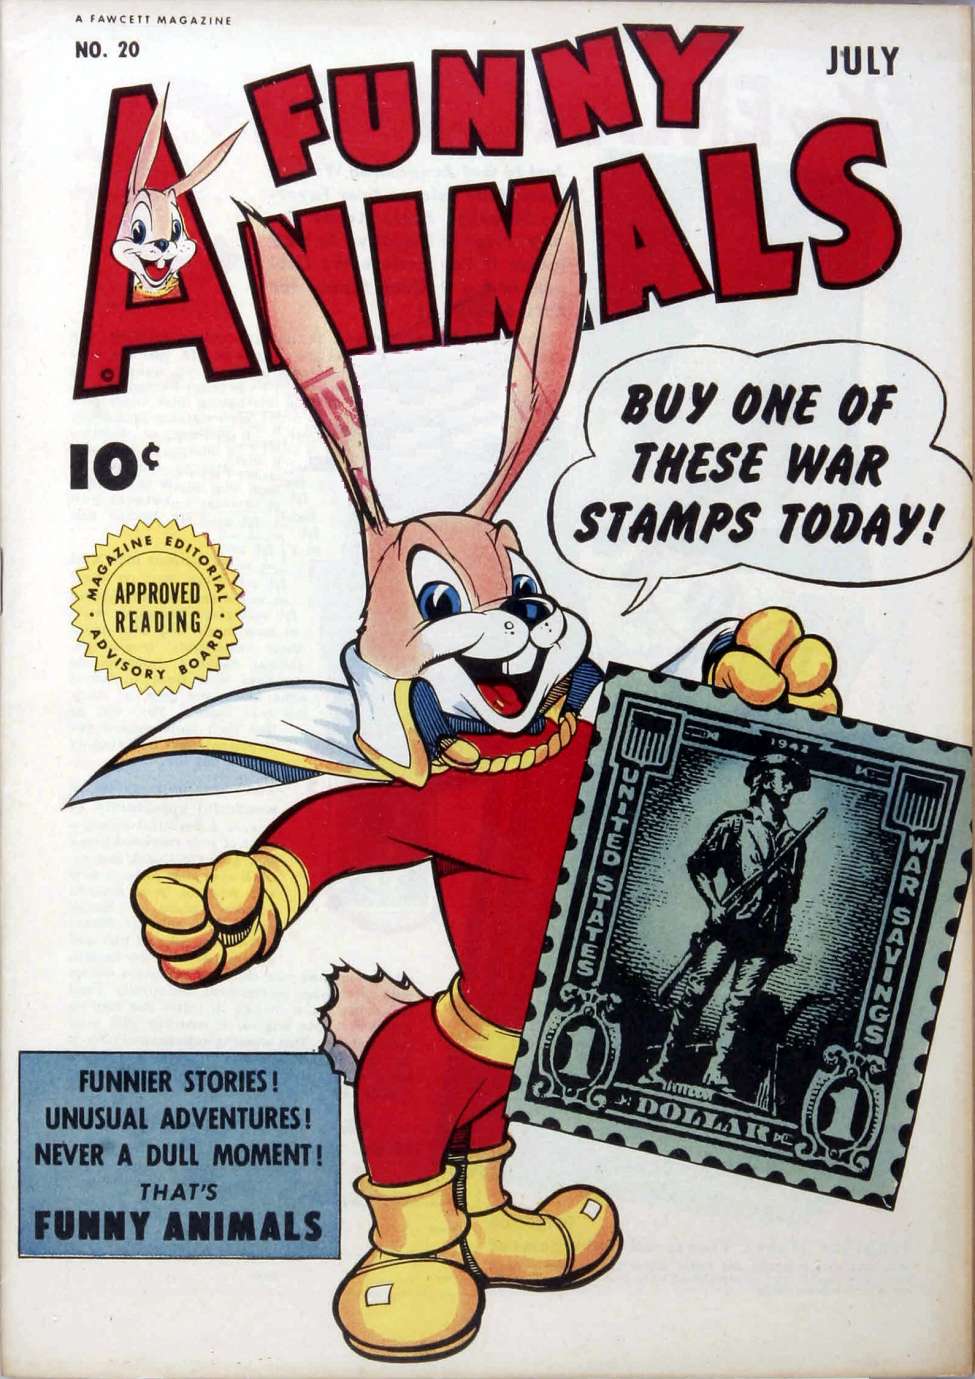 Book Cover For Fawcett's Funny Animals 20 - Version 1